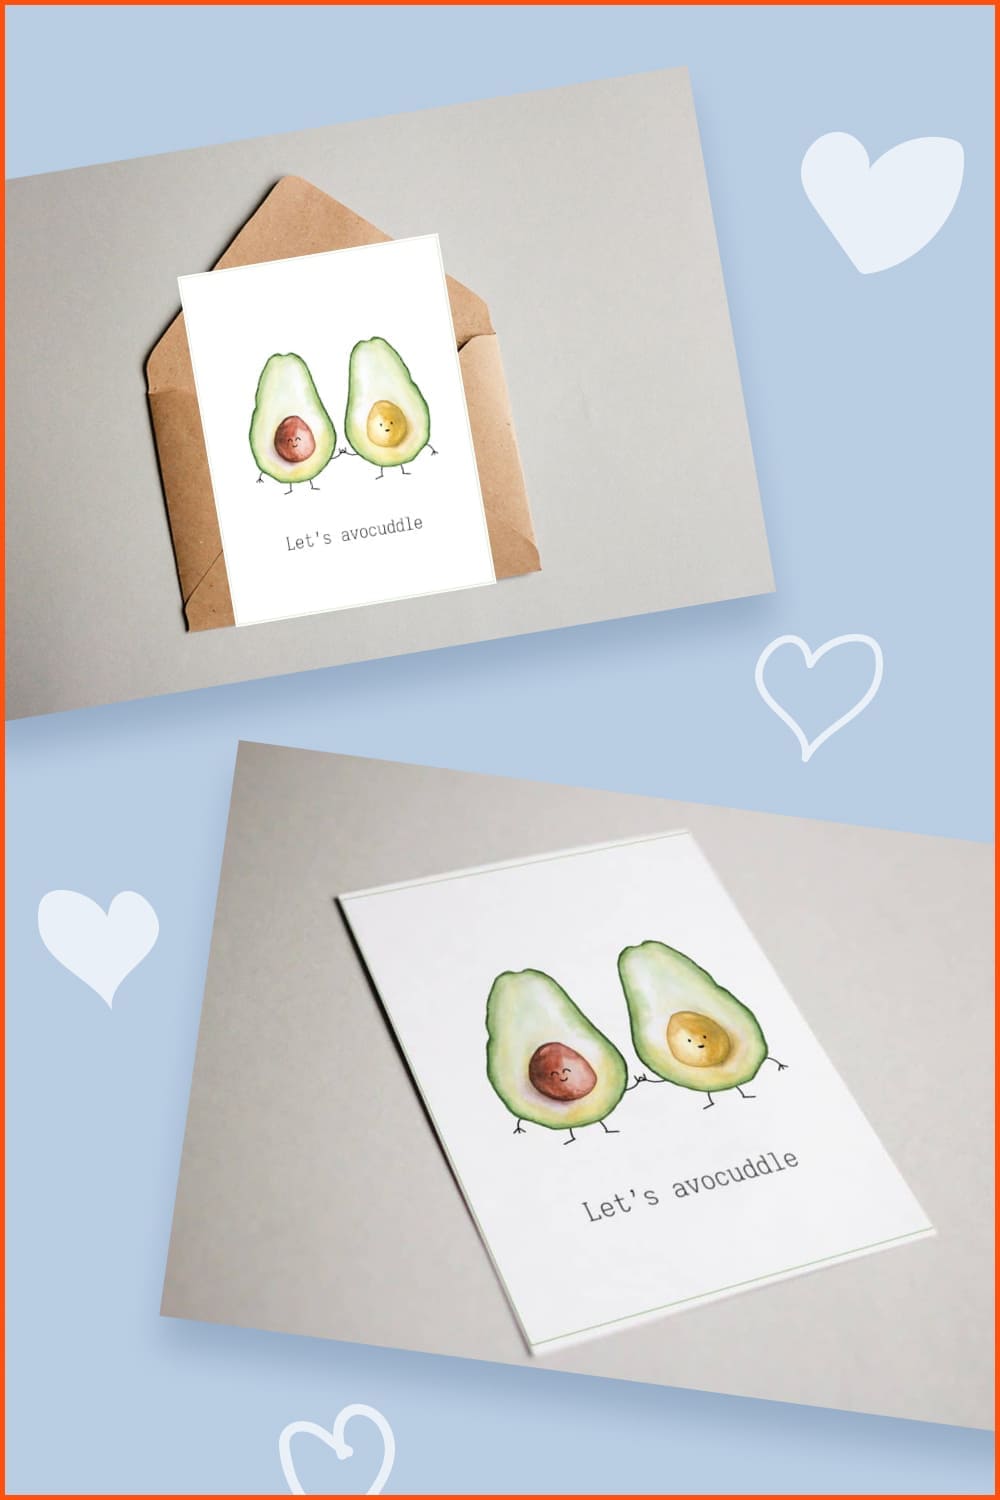 Two cut avocados on a postcard.